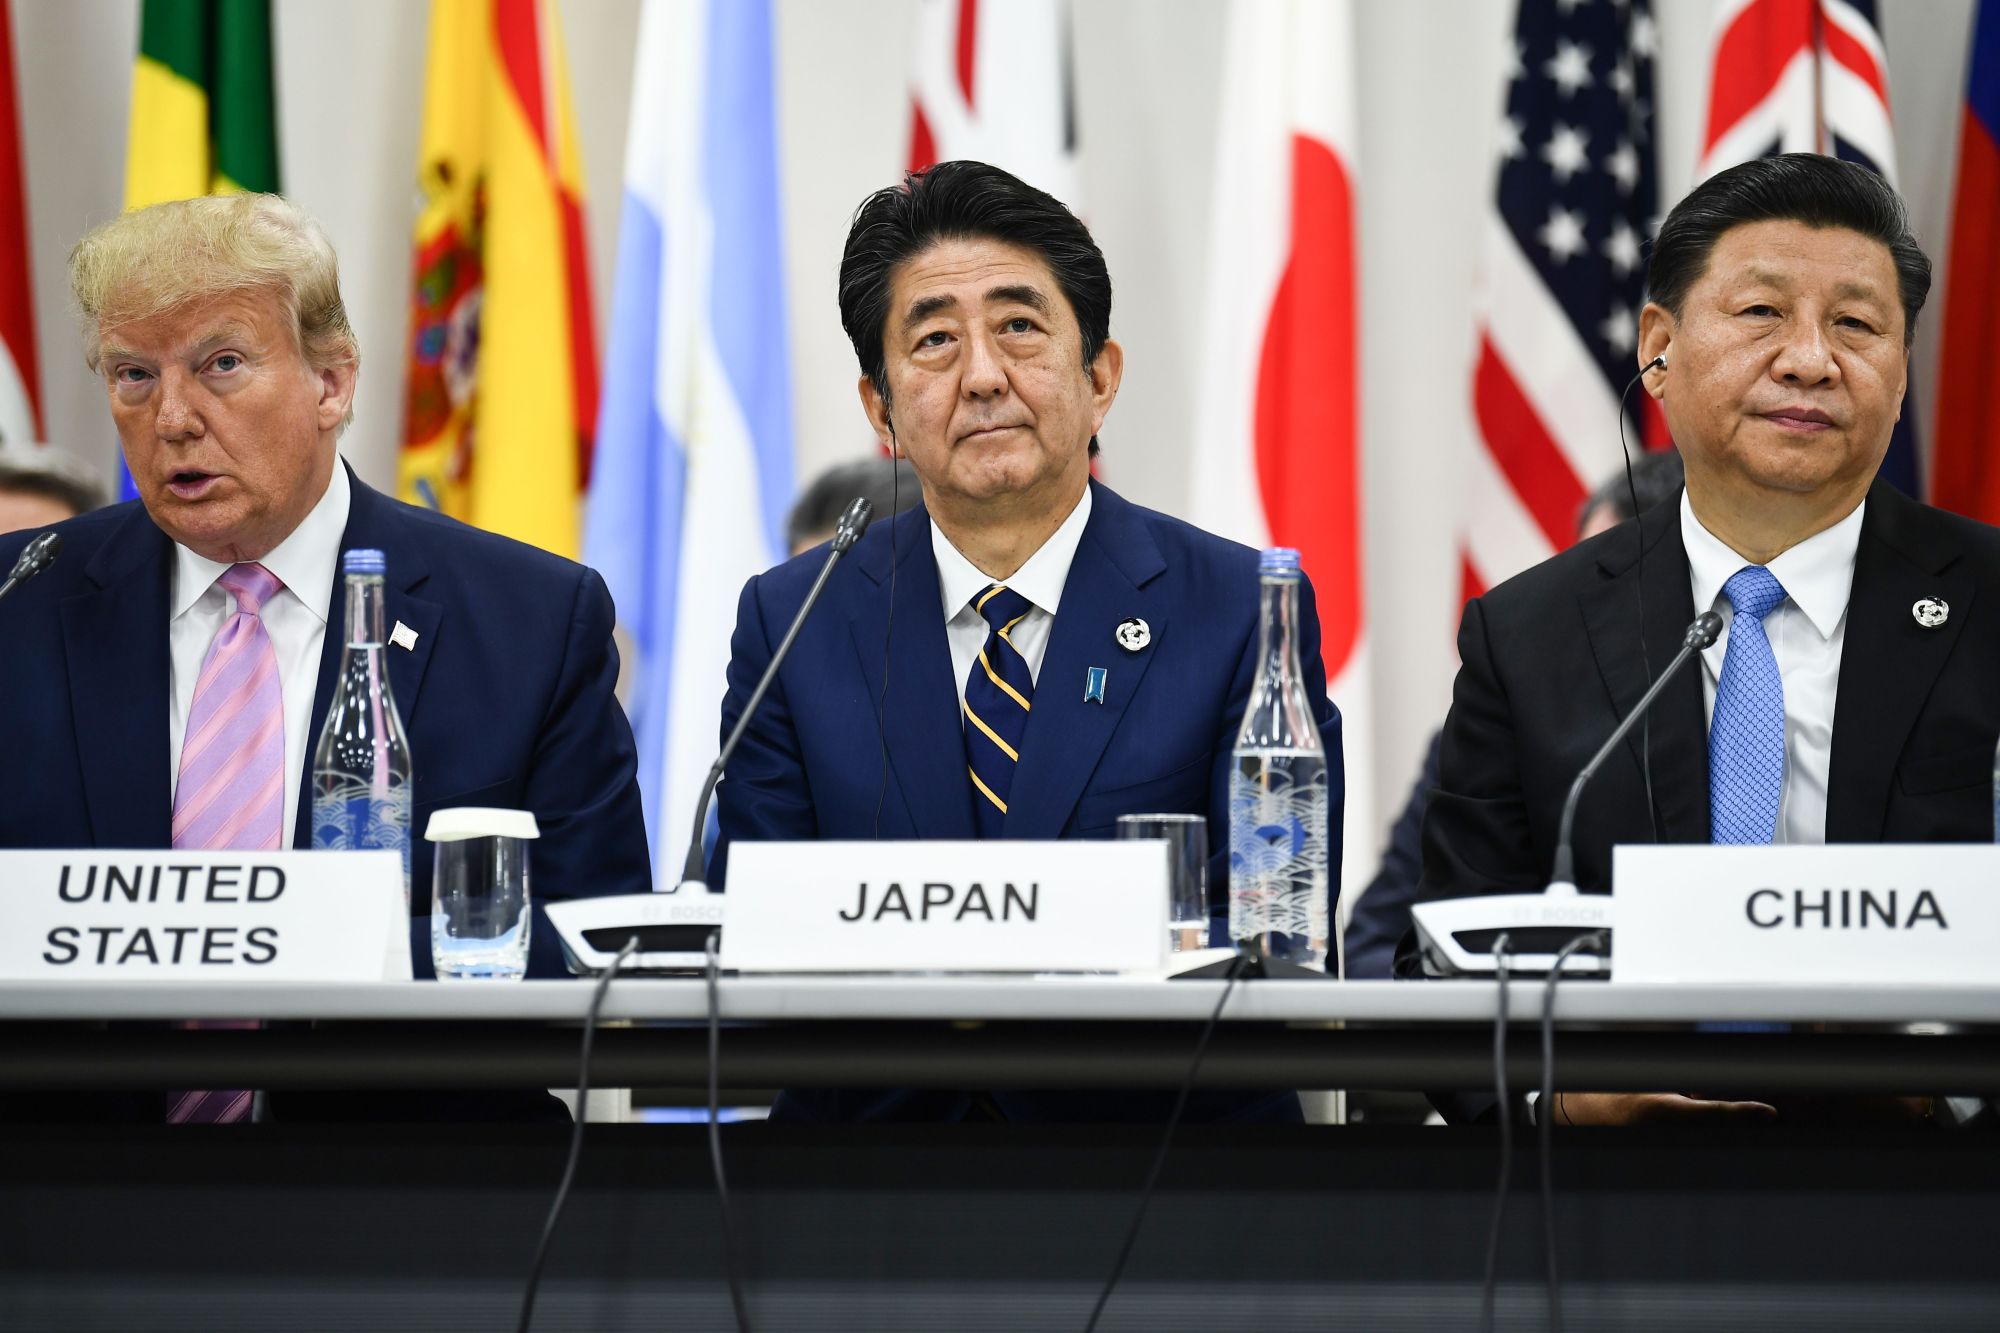 U.S. President Donald Trump, Prime Minister Shinzo Abe and Chinese President Xi Jinping attend a trilateral meeting at the Group of 20 summit Friday in Osaka. | AFP-JIJI